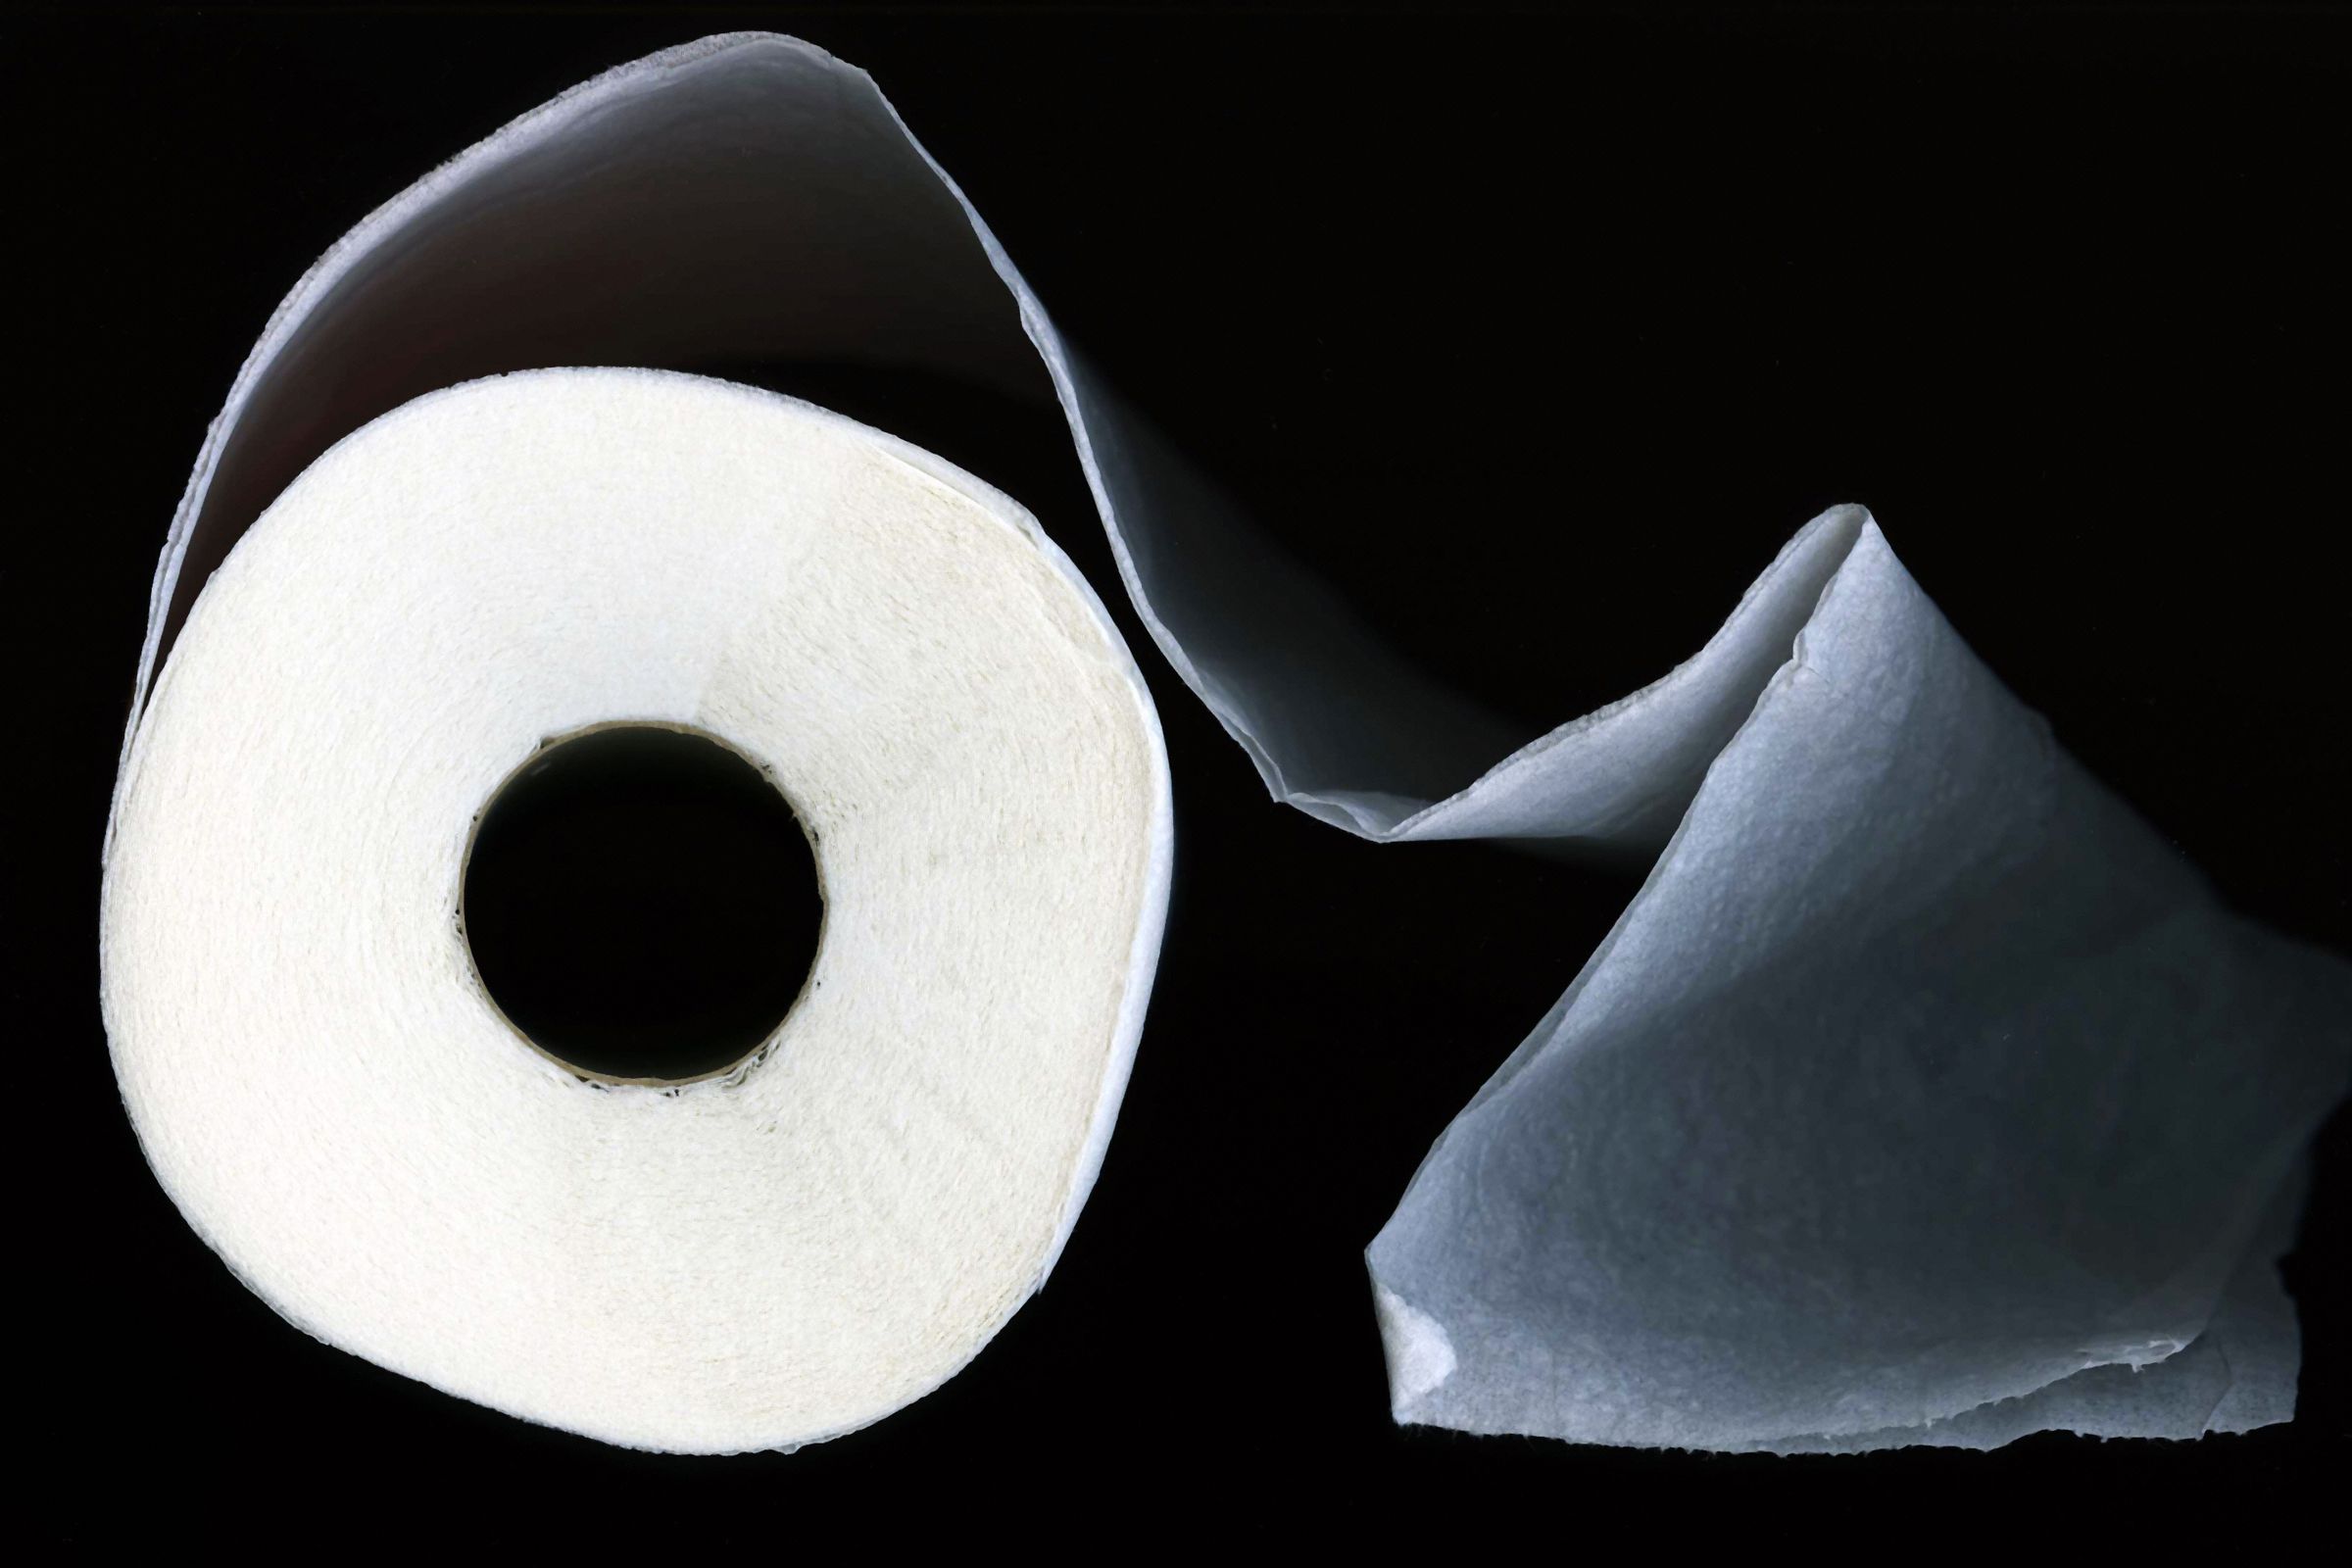 space toilet paper